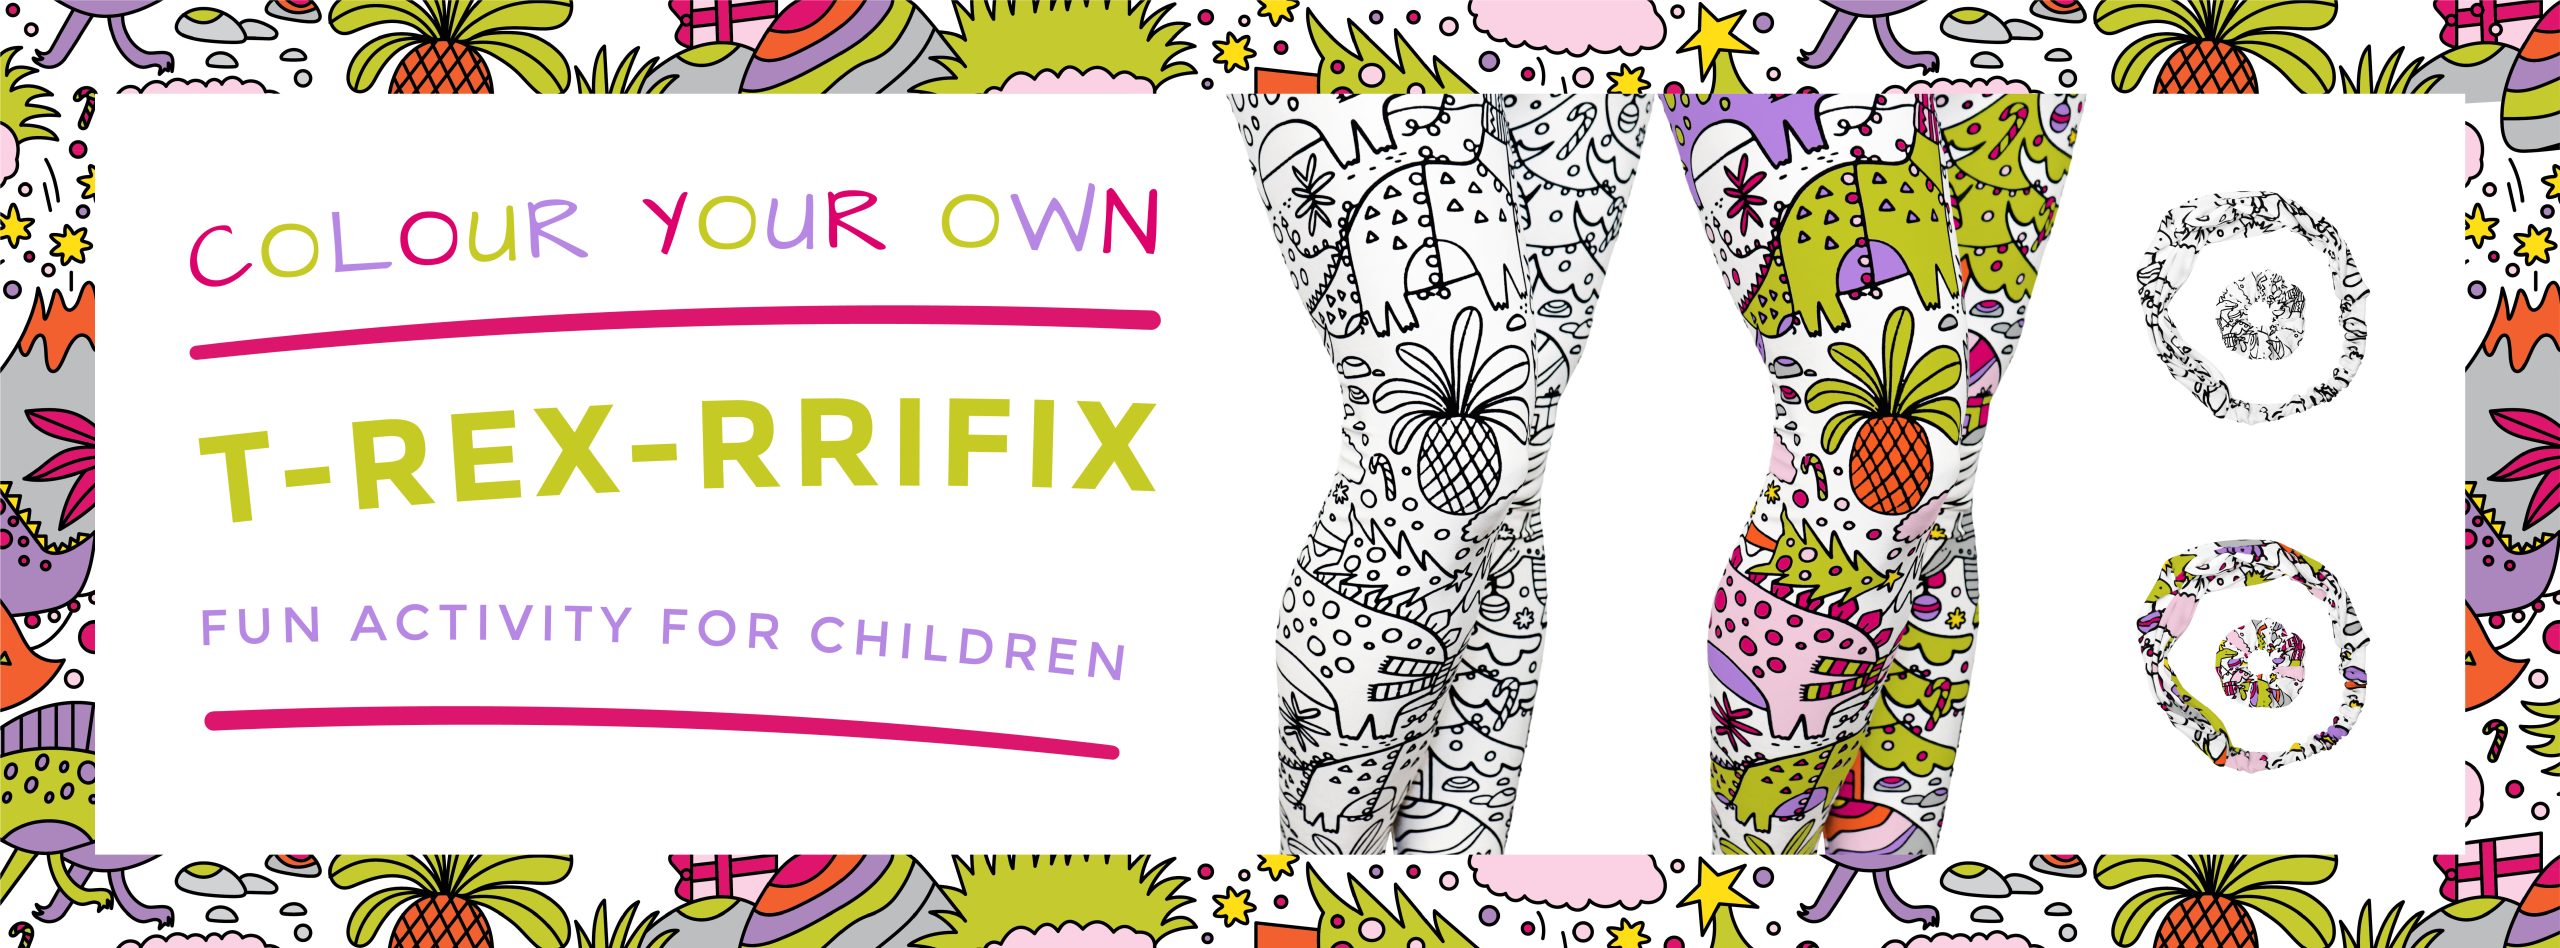 Banner image with Colour Your Own T-Rex Leggings from She's Got Leggz